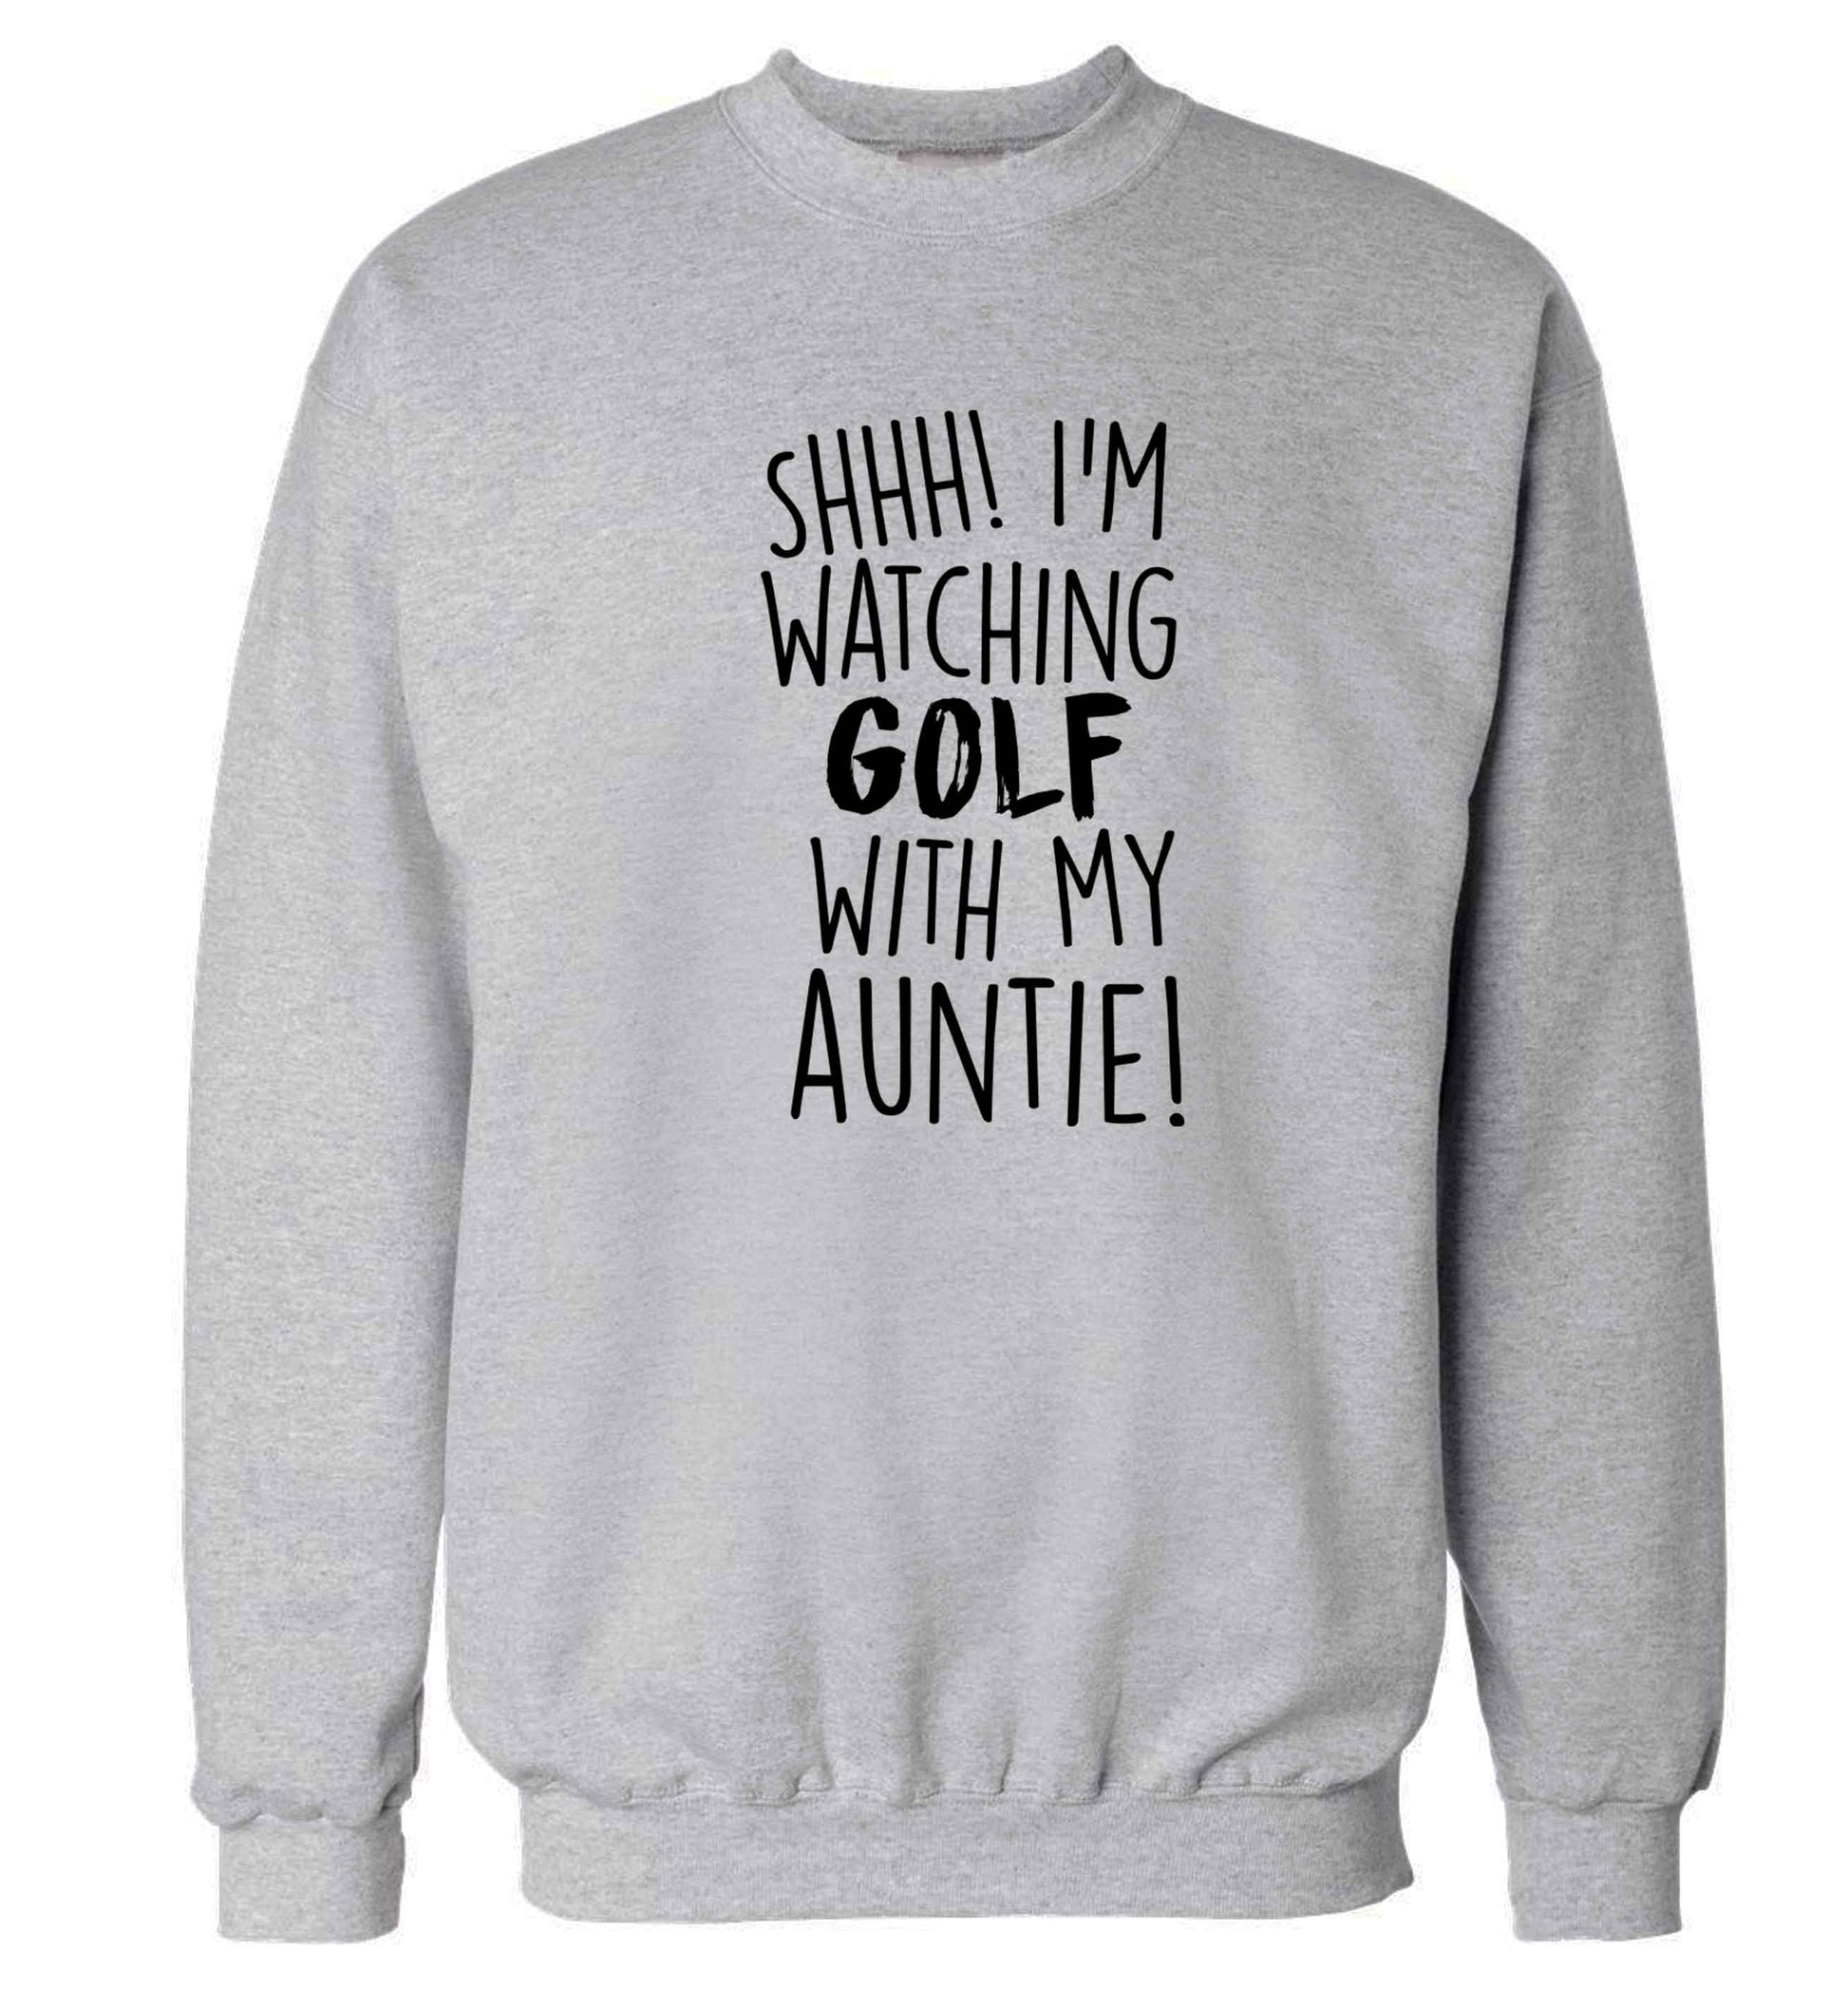 Shh I'm watching golf with my auntie Adult's unisex grey Sweater 2XL